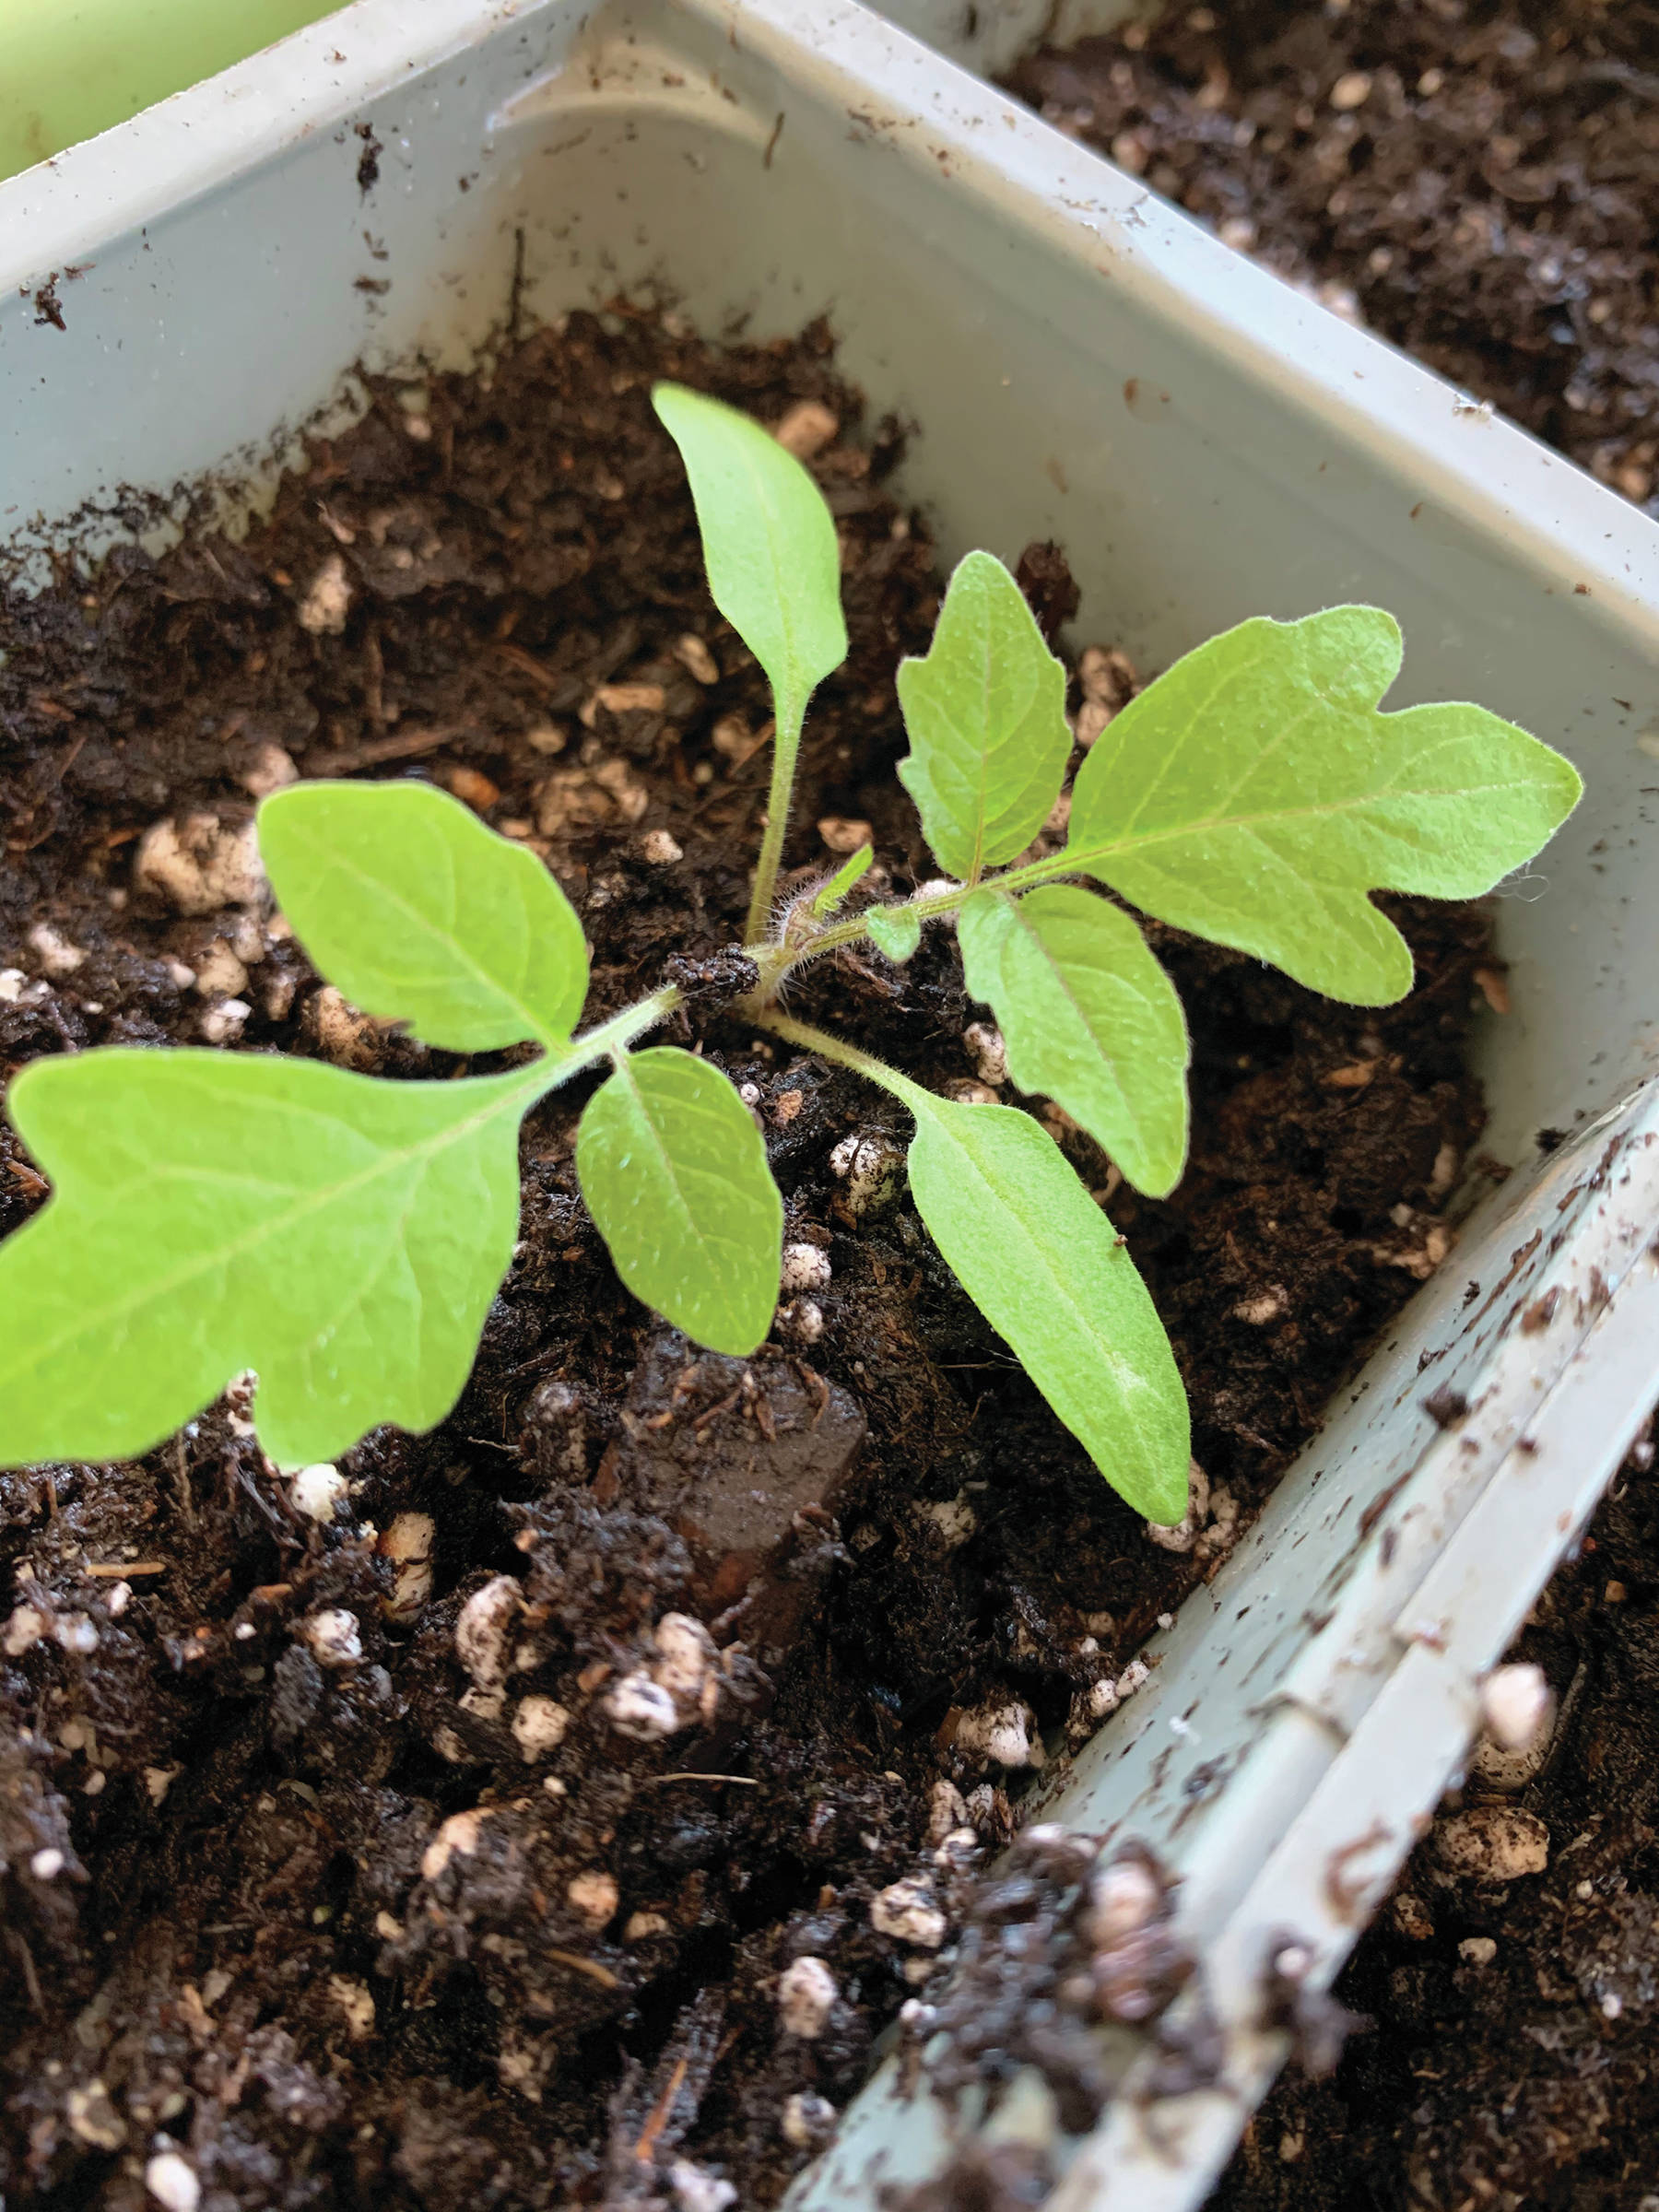 Photo by Rosemary Fitzpatrick                                ”And so it begins, a nascent Black Japanese Trefele tomato seedling, full of promise,” writes the Kachemak Gardener of a photo of this start taken on March 14 at her Homer home.